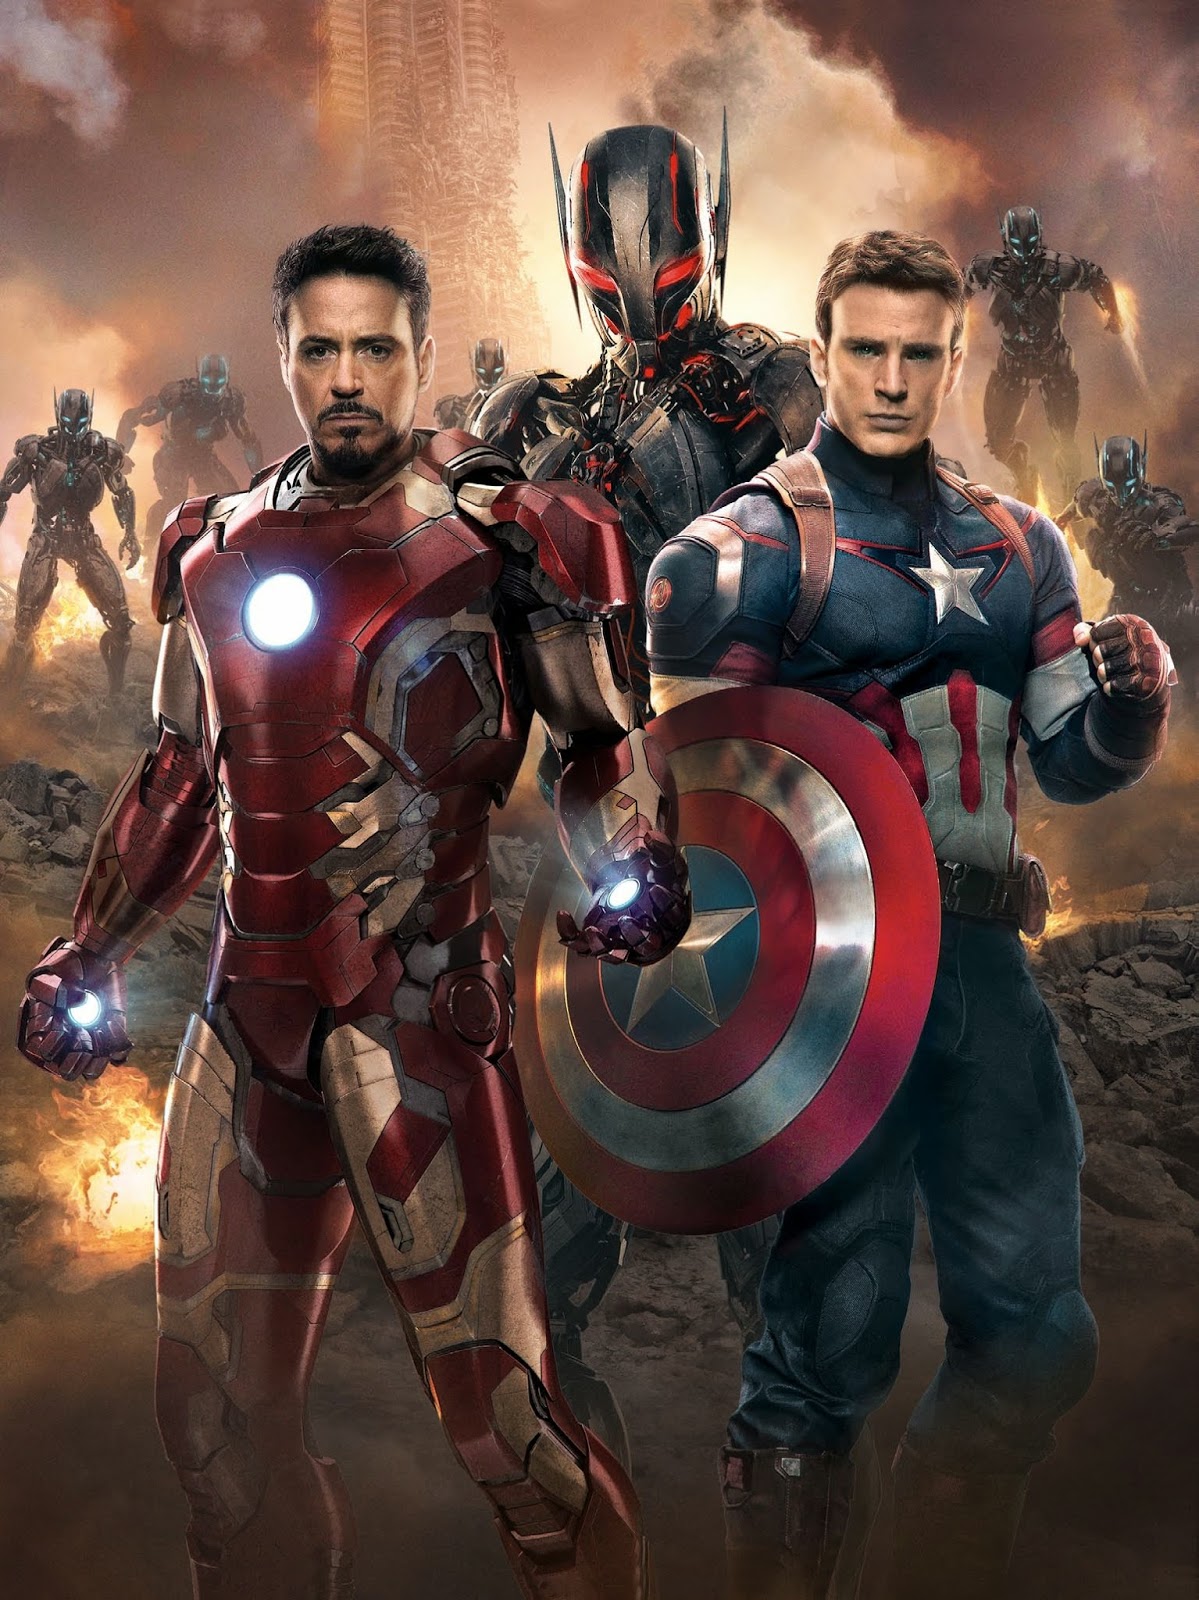 Avengers age of ultron poster